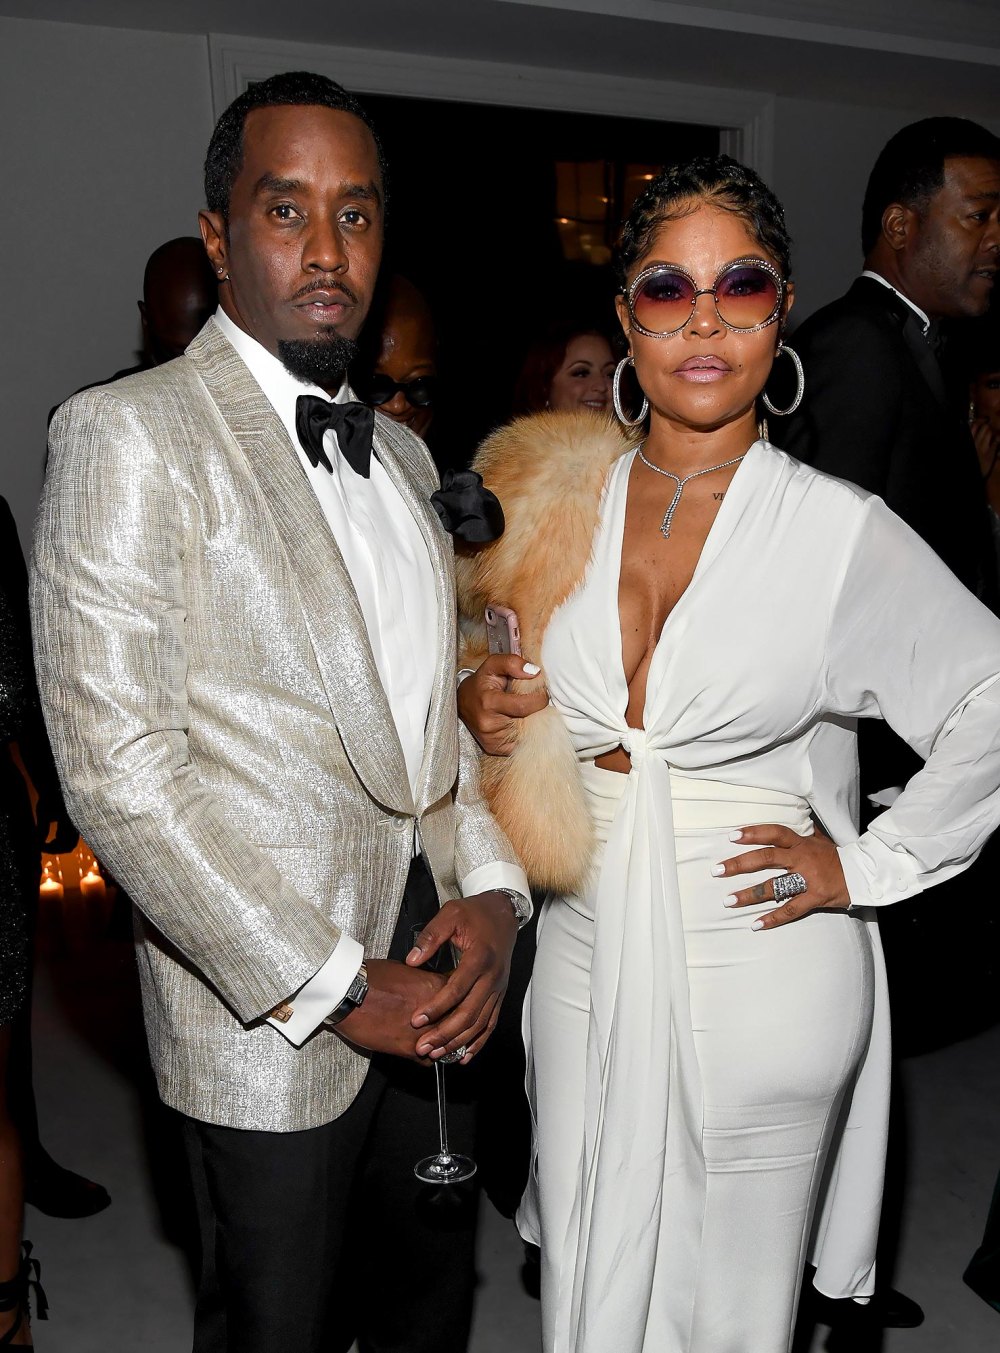 Diddy and Ex-Girlfriend Misa Hylton’s Relationship Timeline: The Way They Were